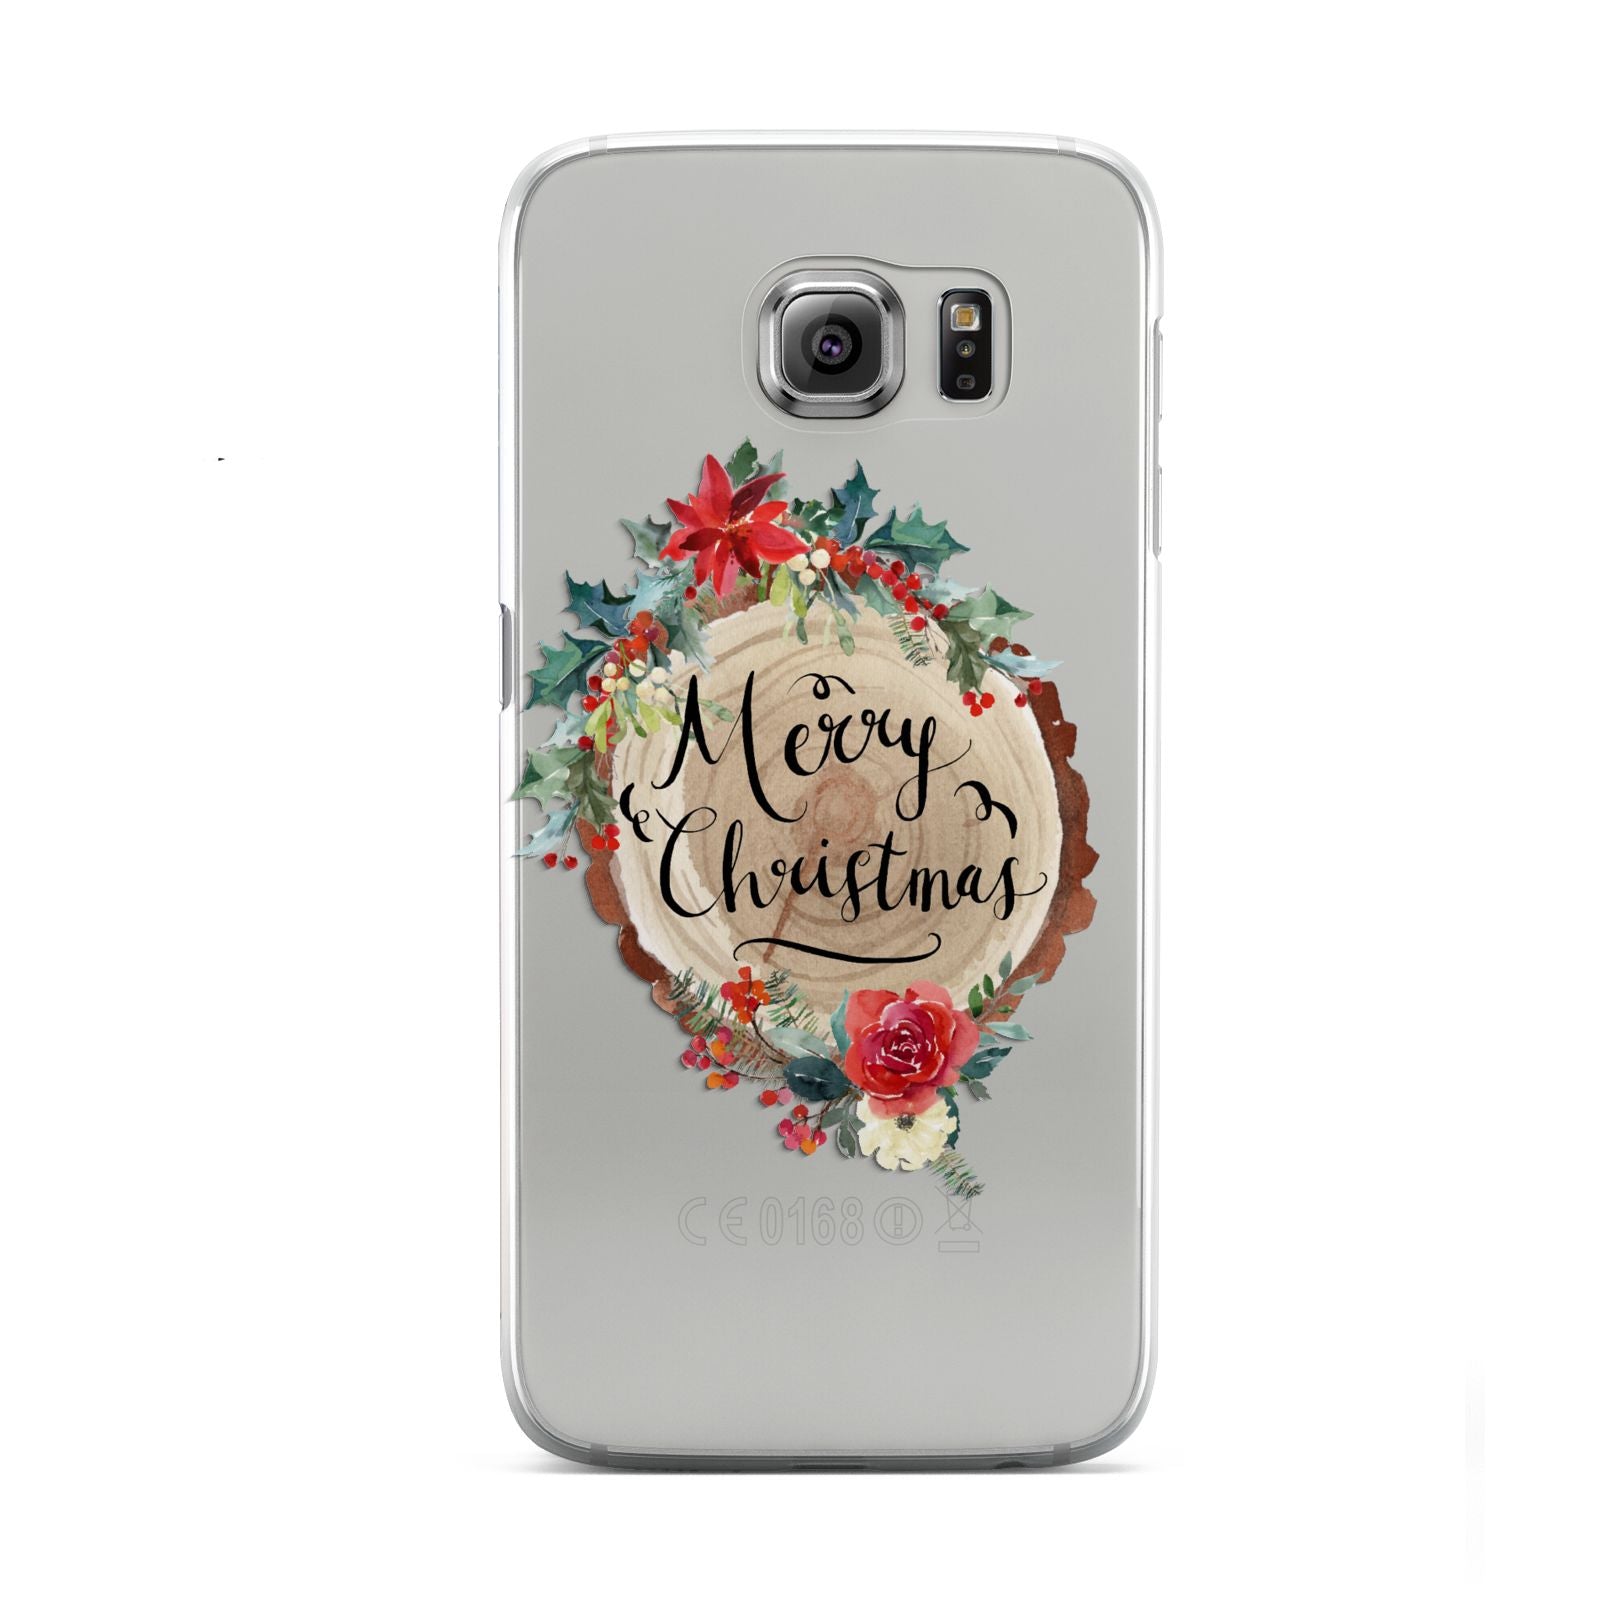 Merry Christmas Log Floral Samsung Galaxy S6 Case